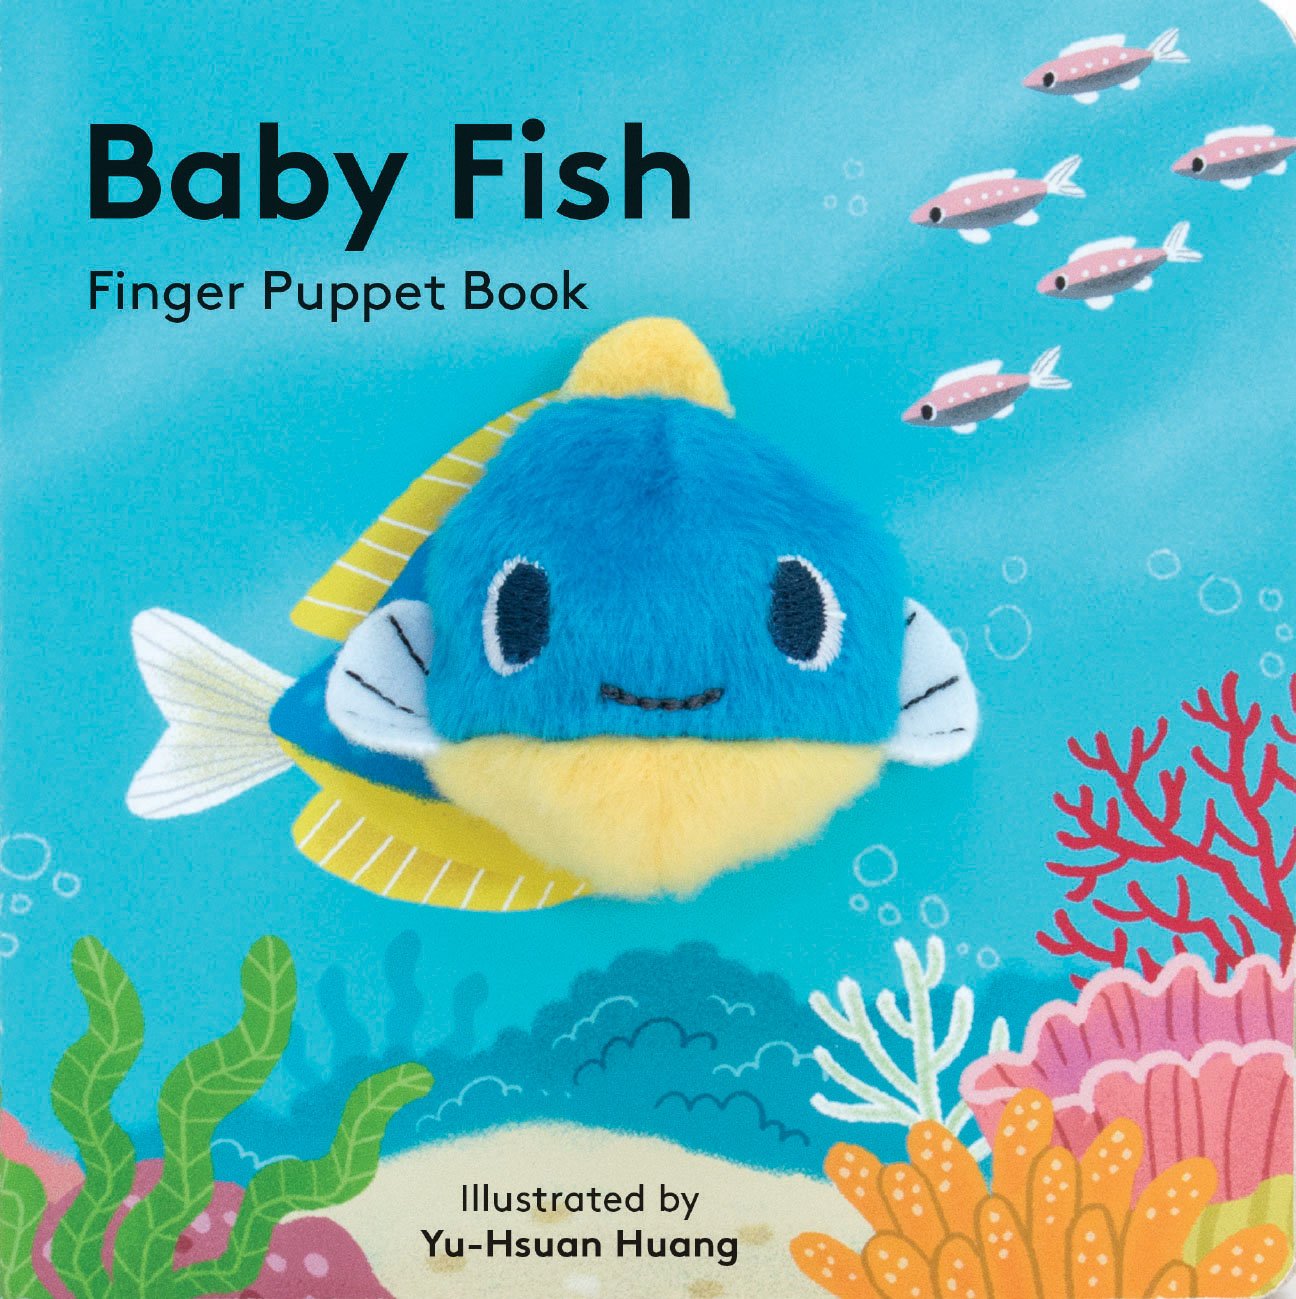 "Baby Fish" Finger Puppet Book